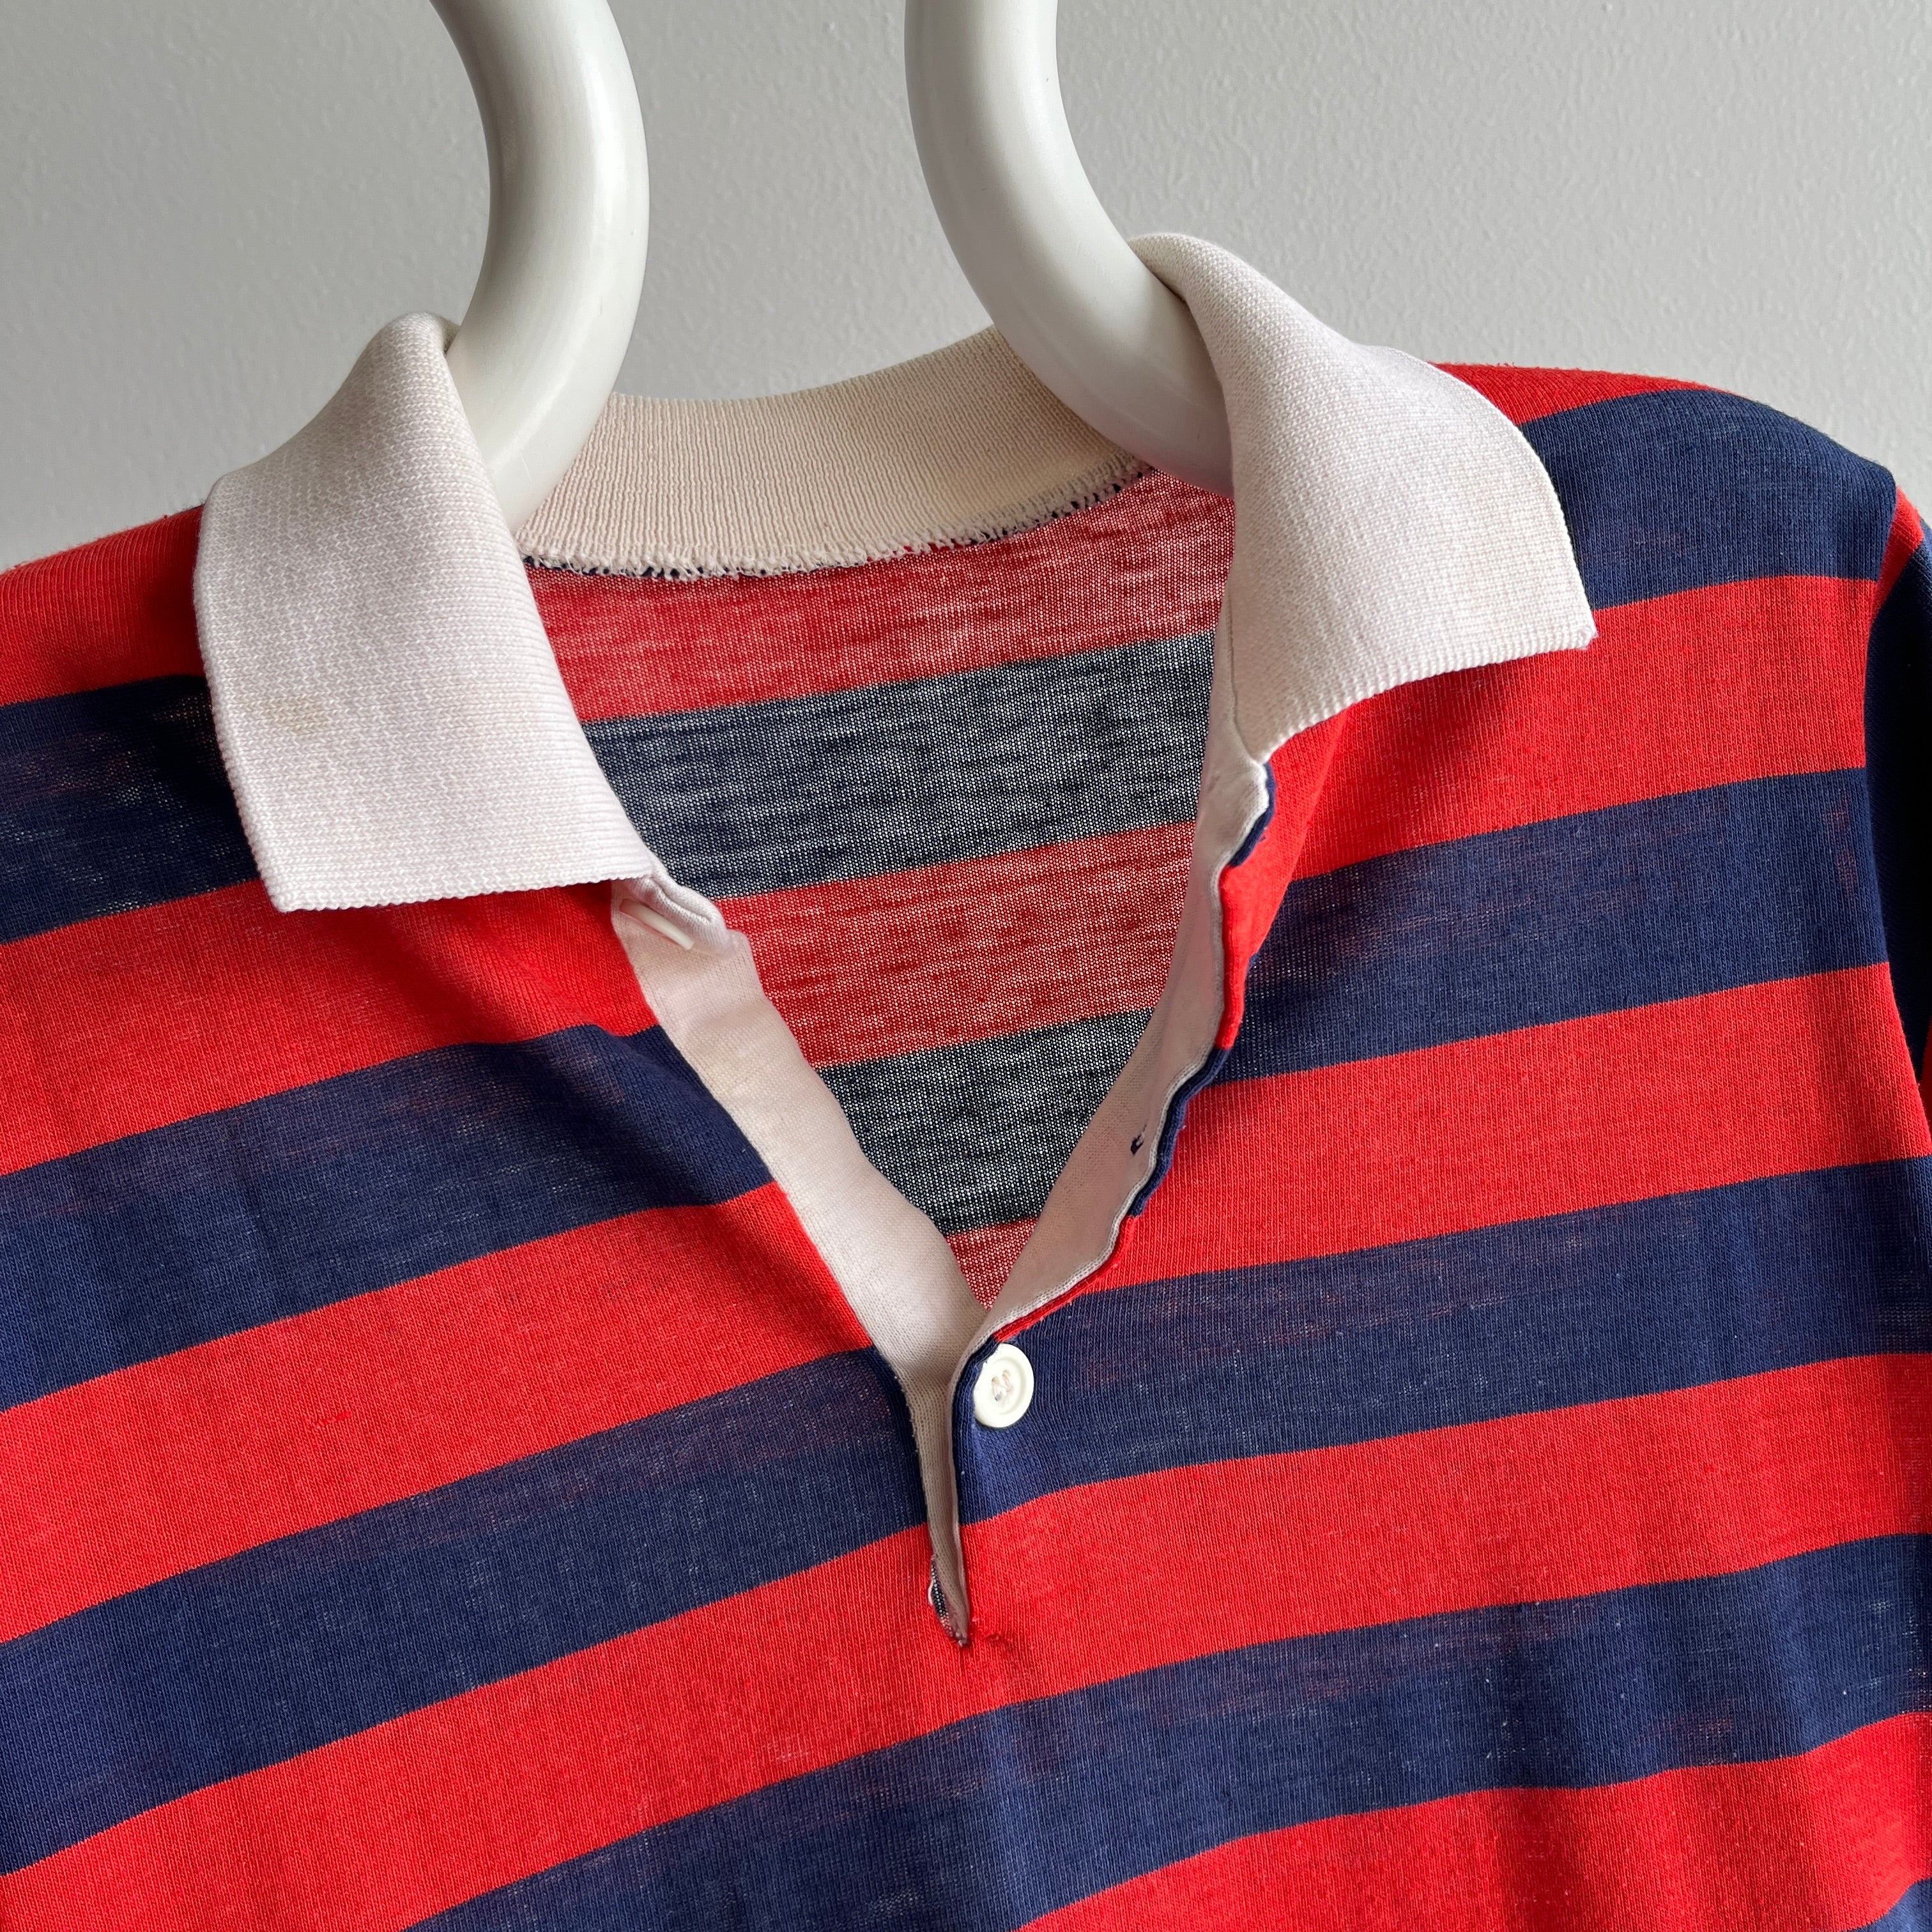 1970s Red, White and Blue Striped Worn Out and Destroyed Polo Shirt